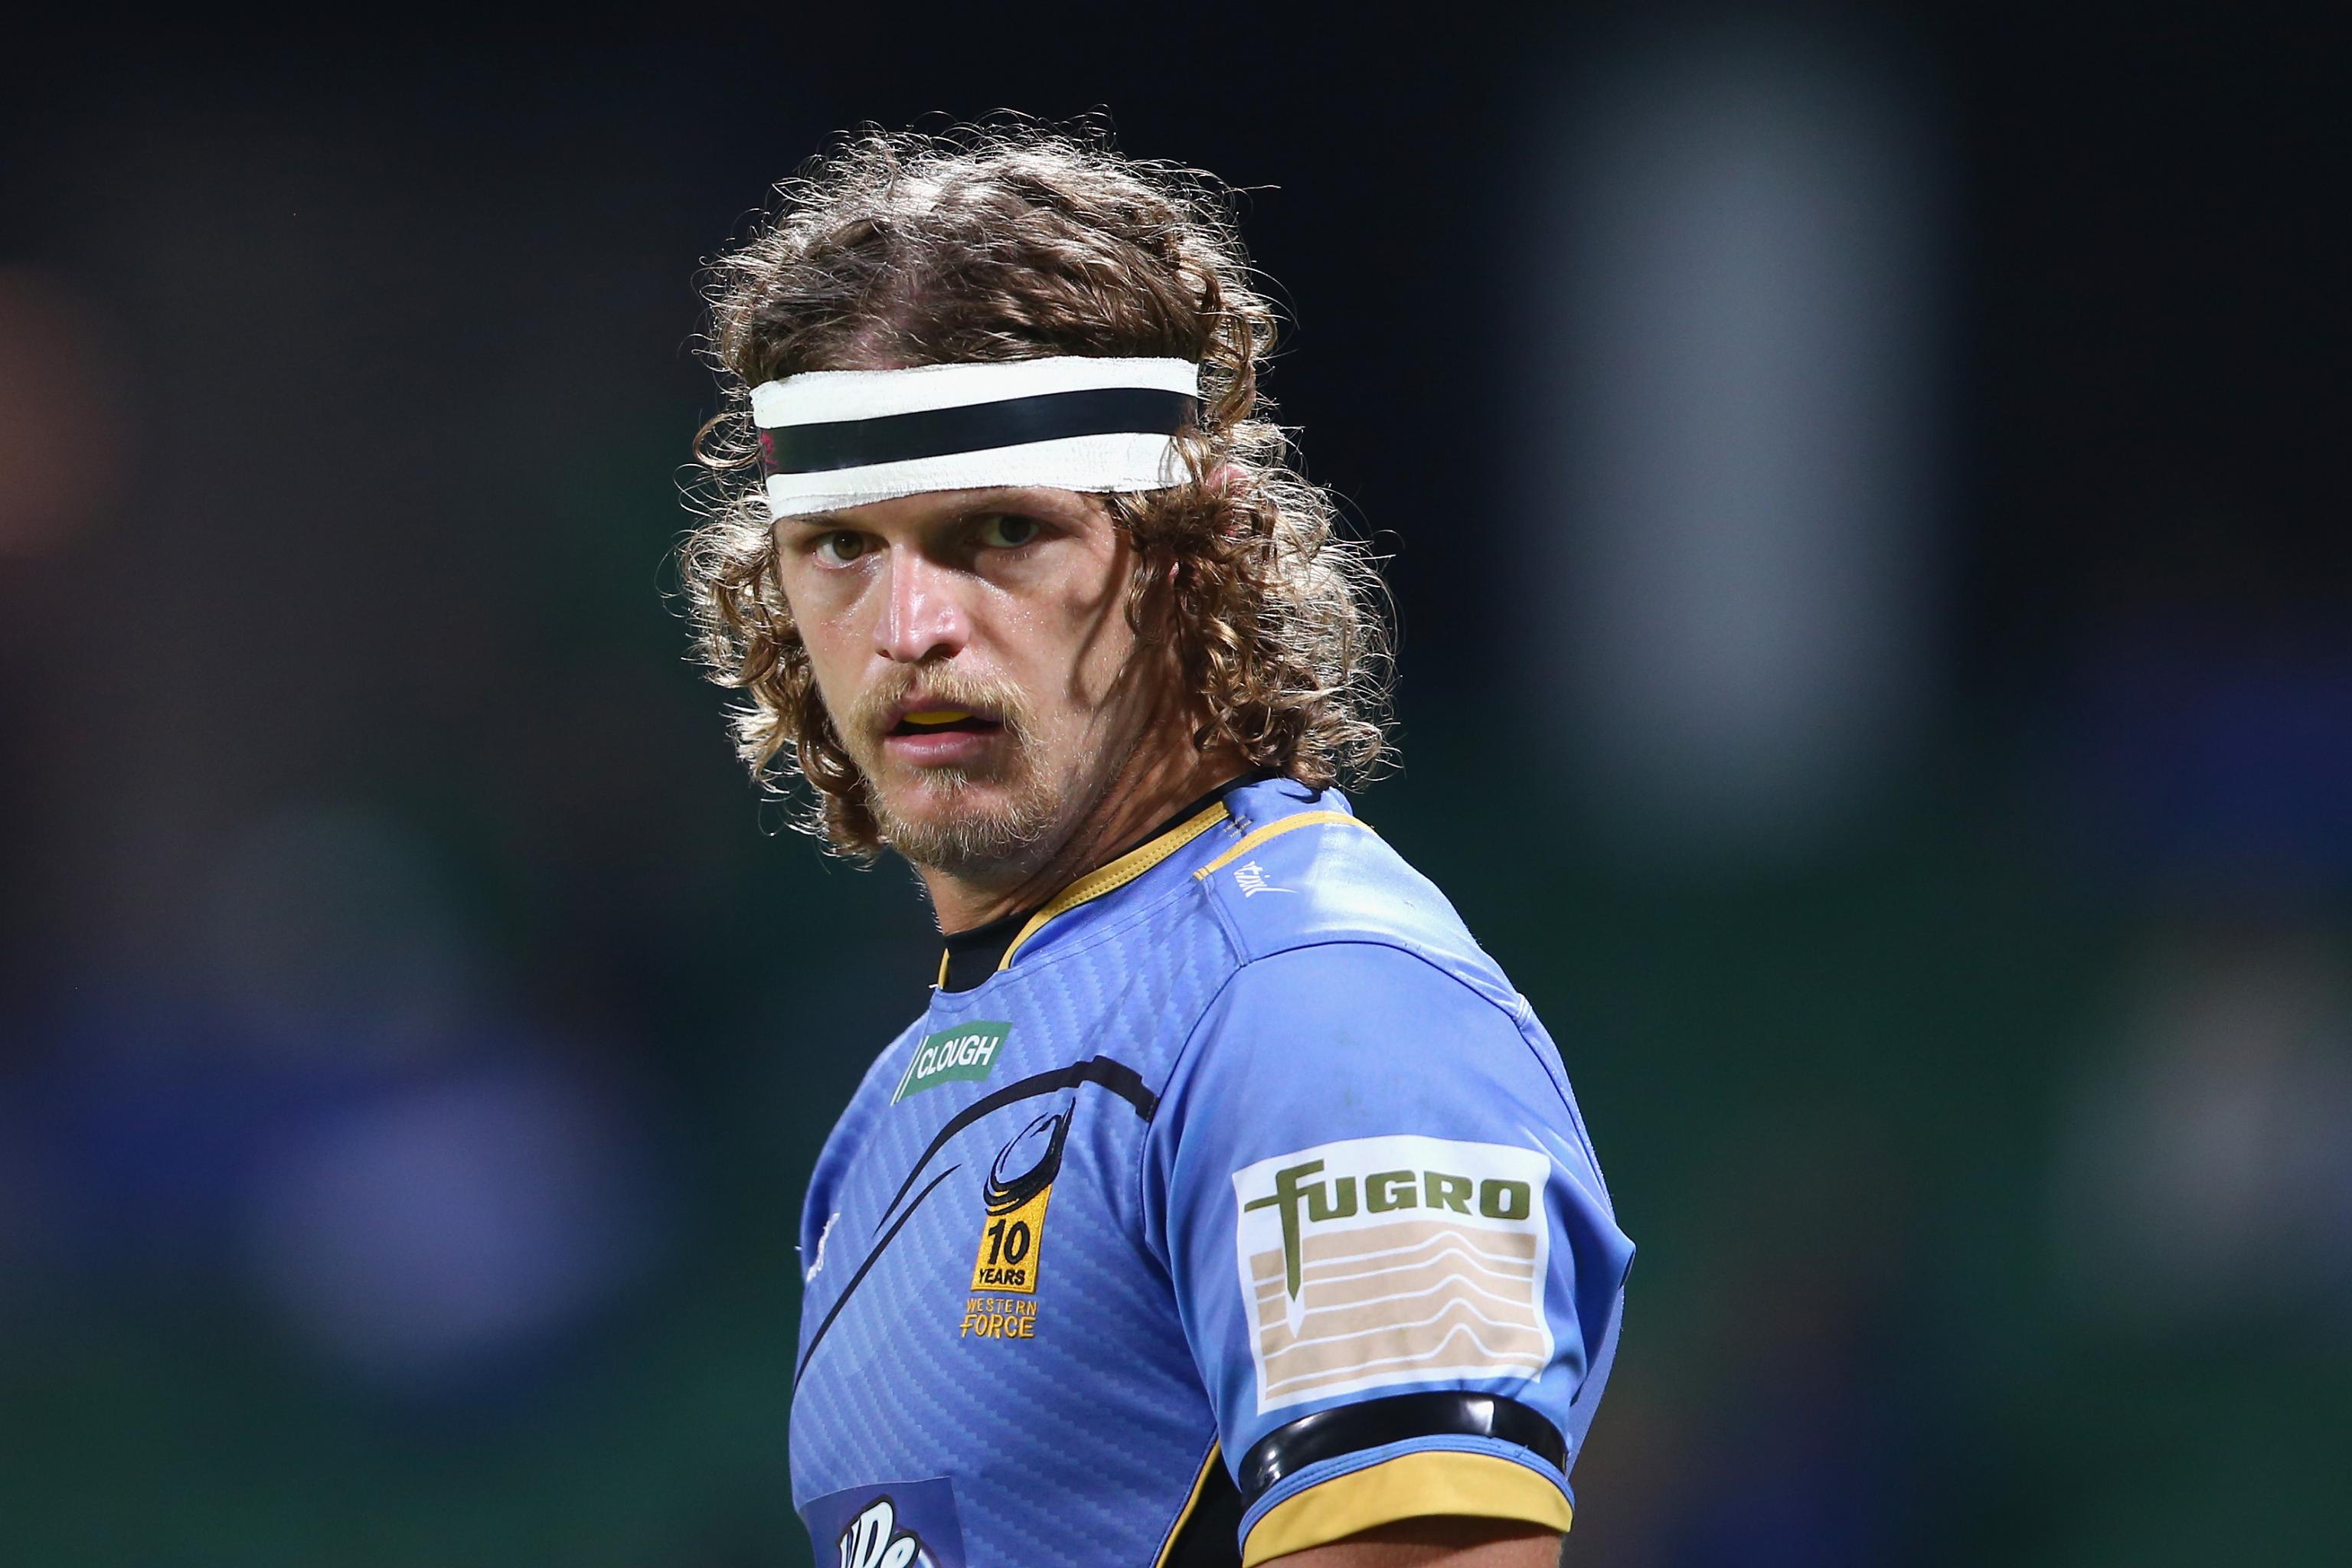 Honey Badger', Nick Cummins, back with Western Force and eyeing